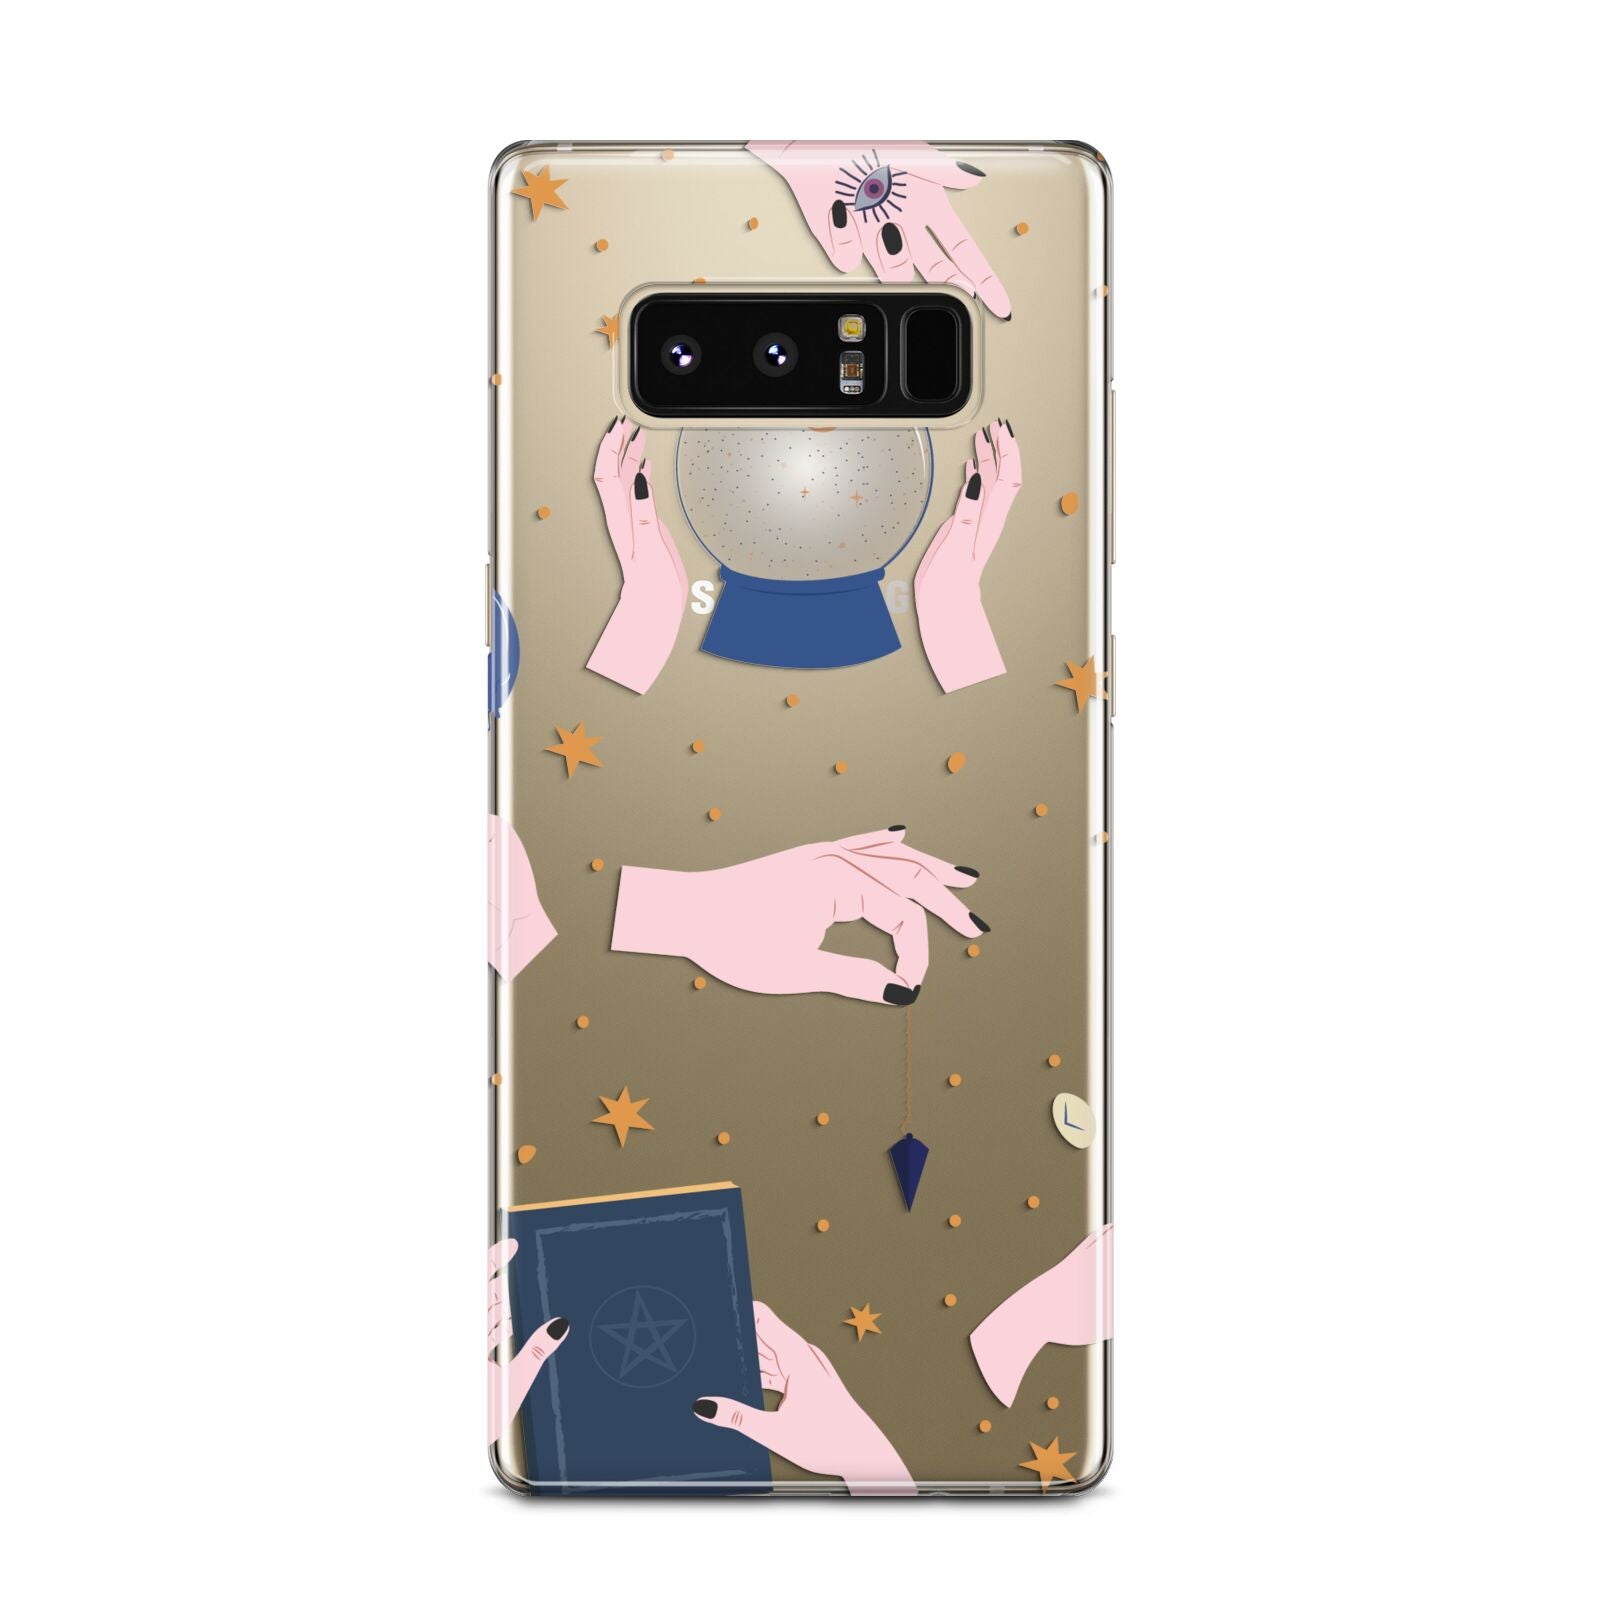 Clairvoyant Witches Hands Samsung Galaxy Note 8 Case